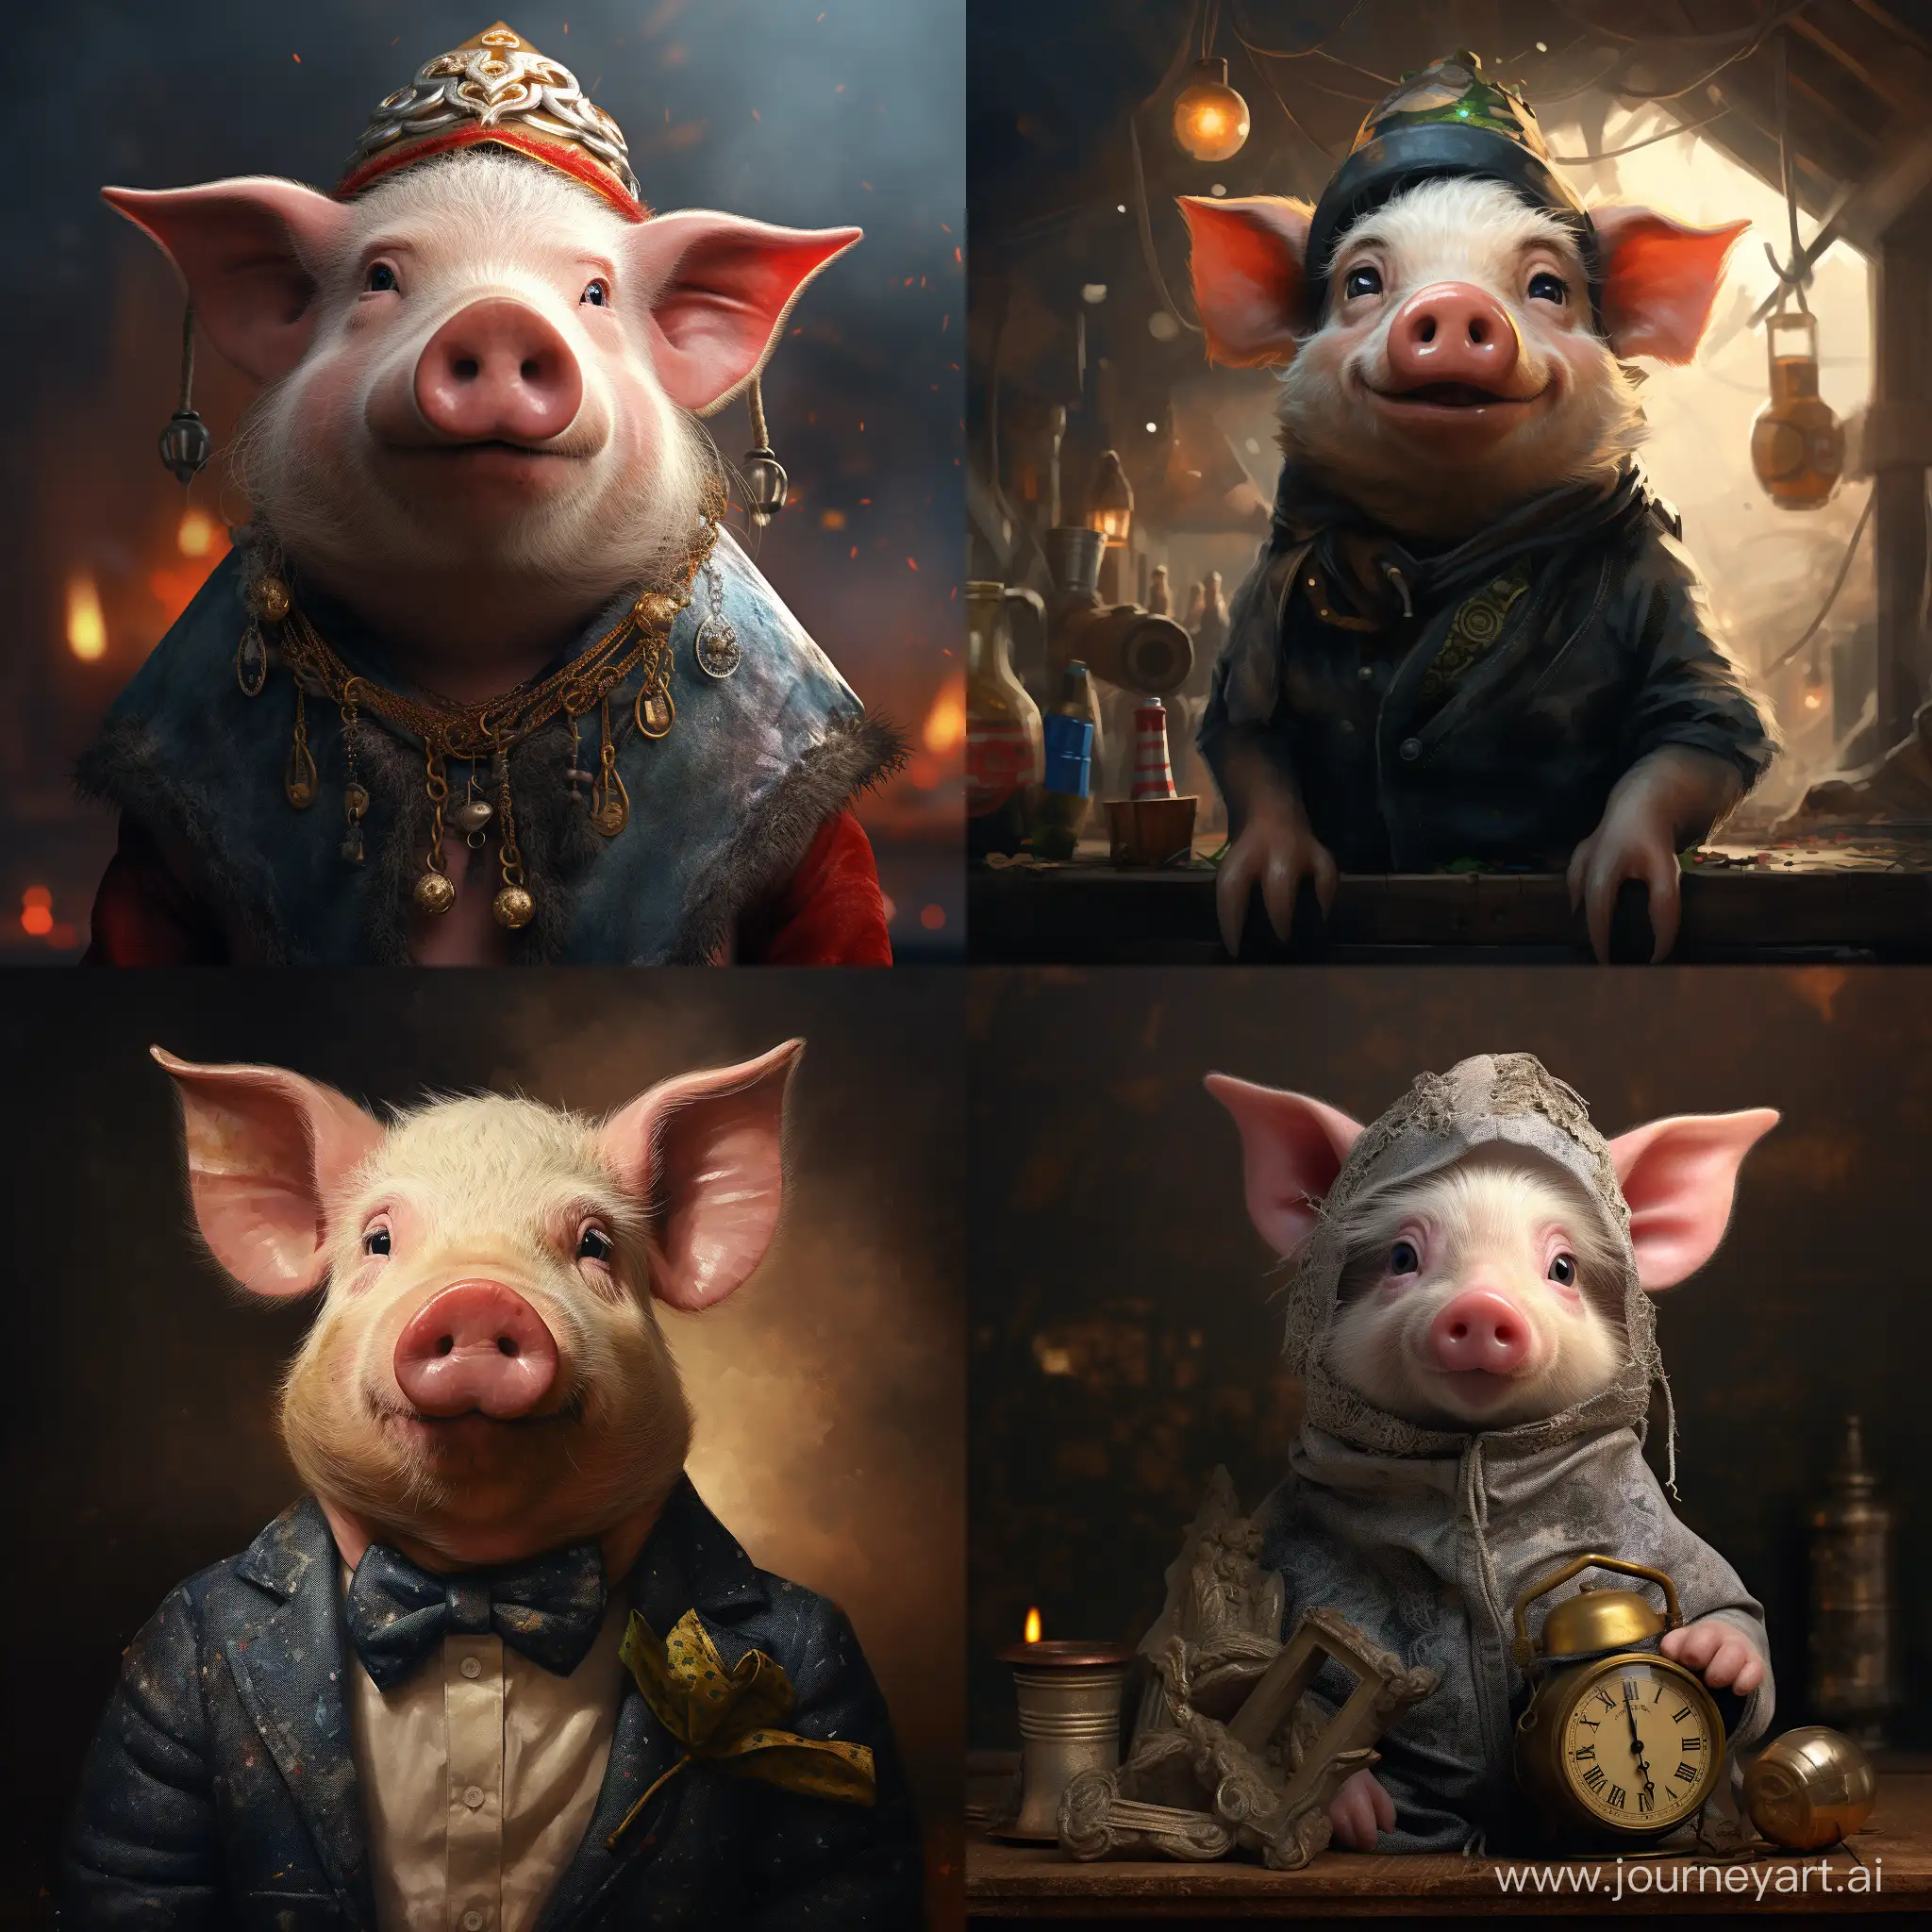 Celebrating-New-Year-with-a-Festive-Pig-Art